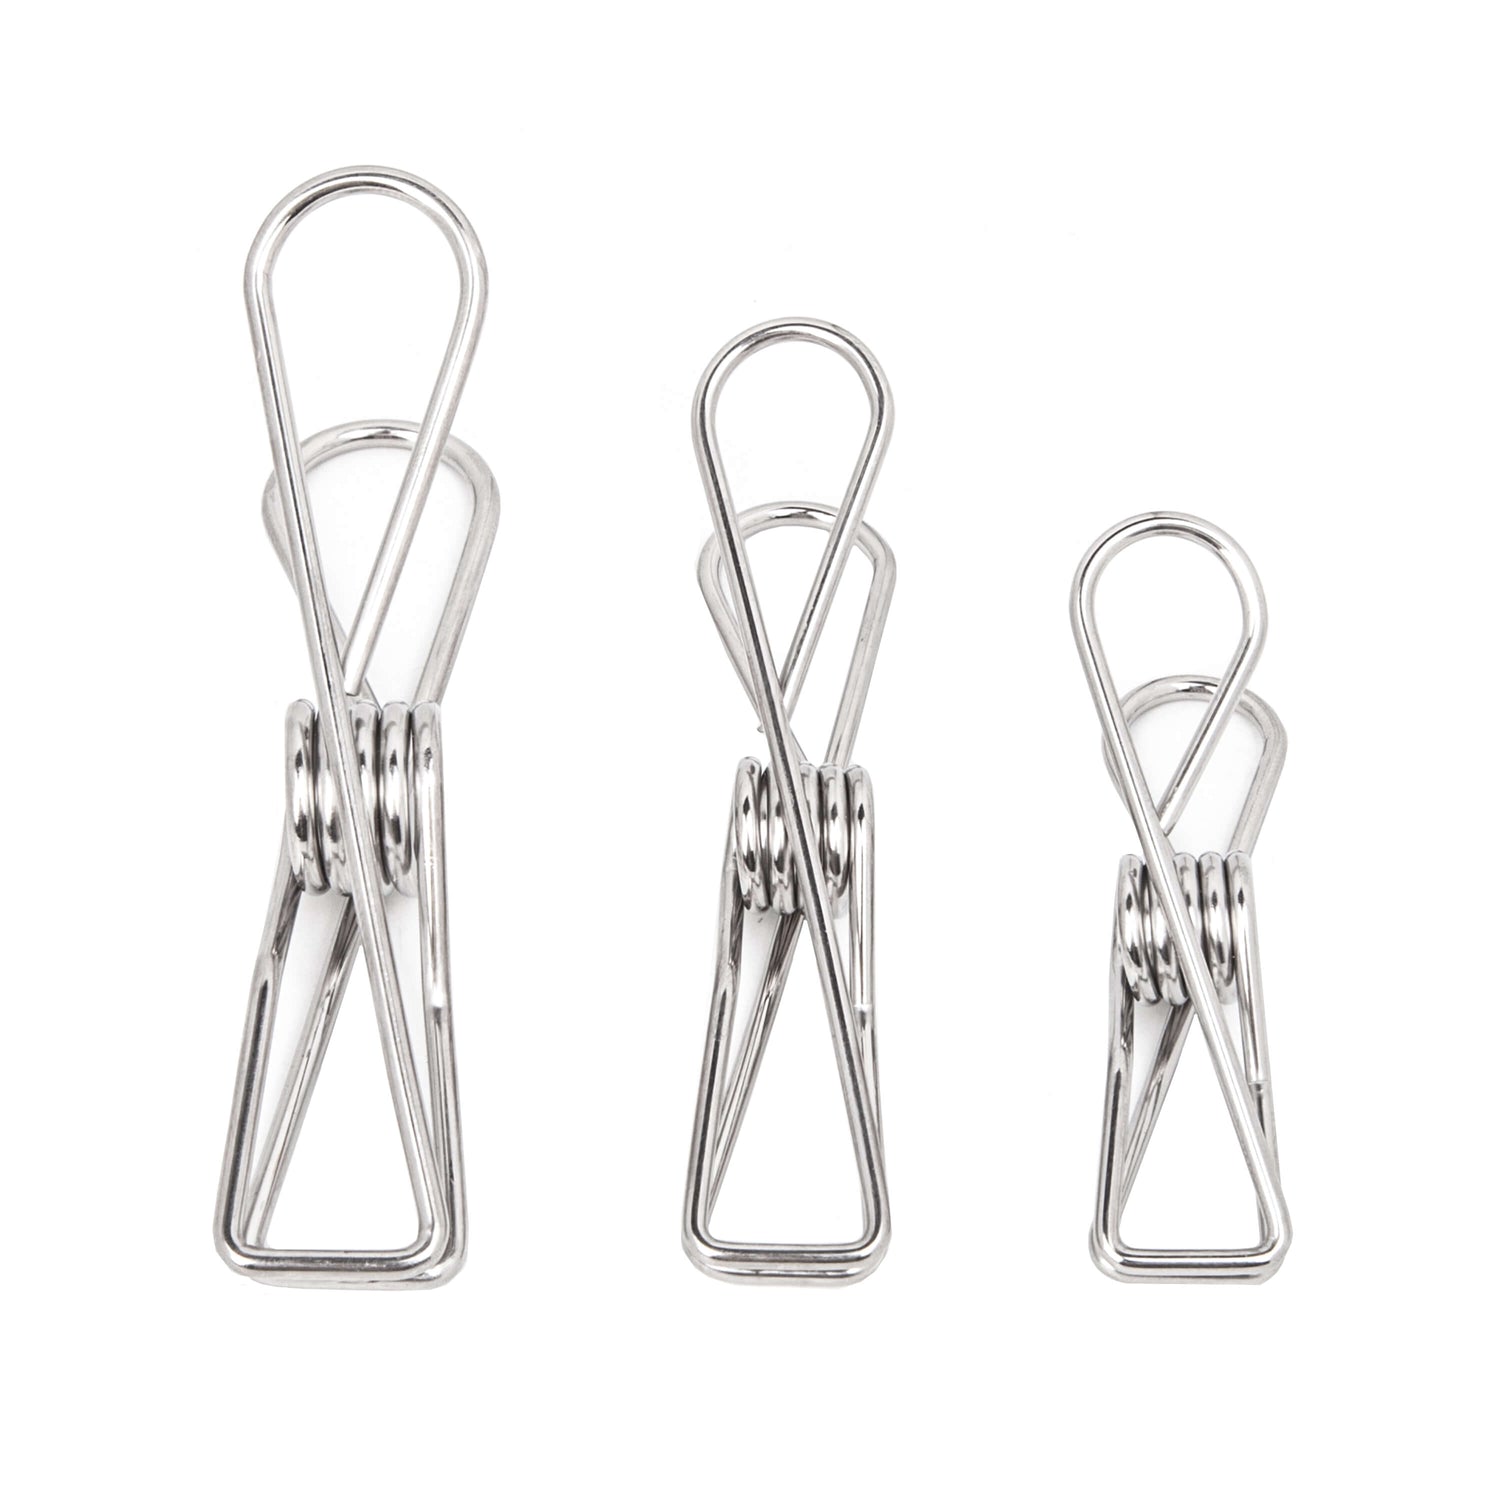 6PCS Sample Pack Silver Stainless Clothing Pegs - EcoLuxe Living